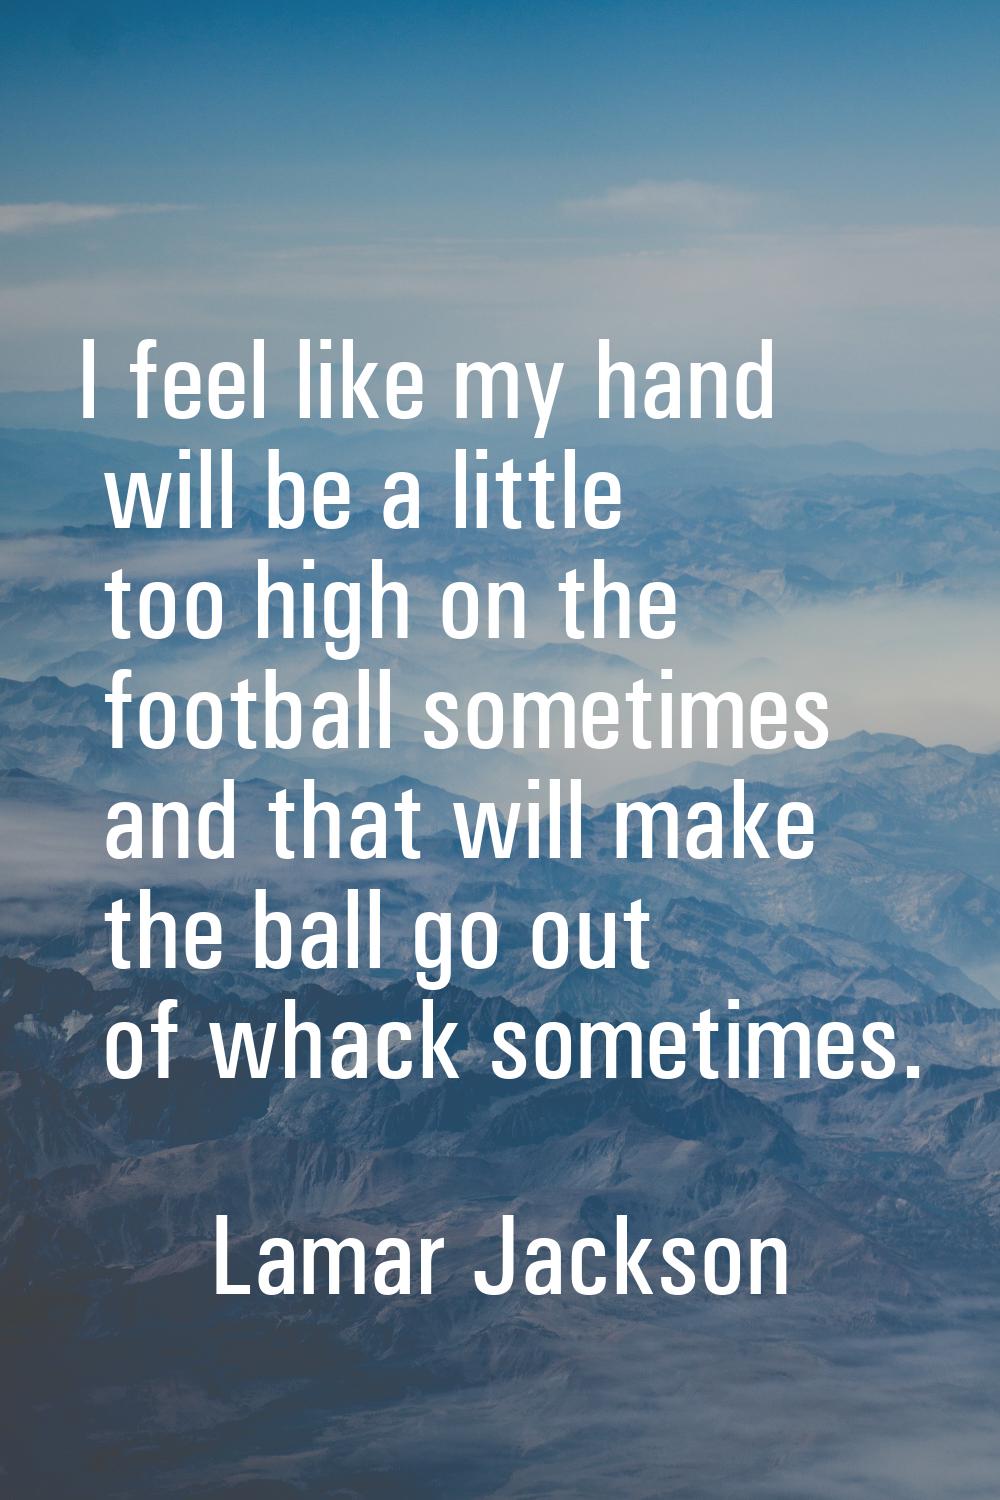 I feel like my hand will be a little too high on the football sometimes and that will make the ball